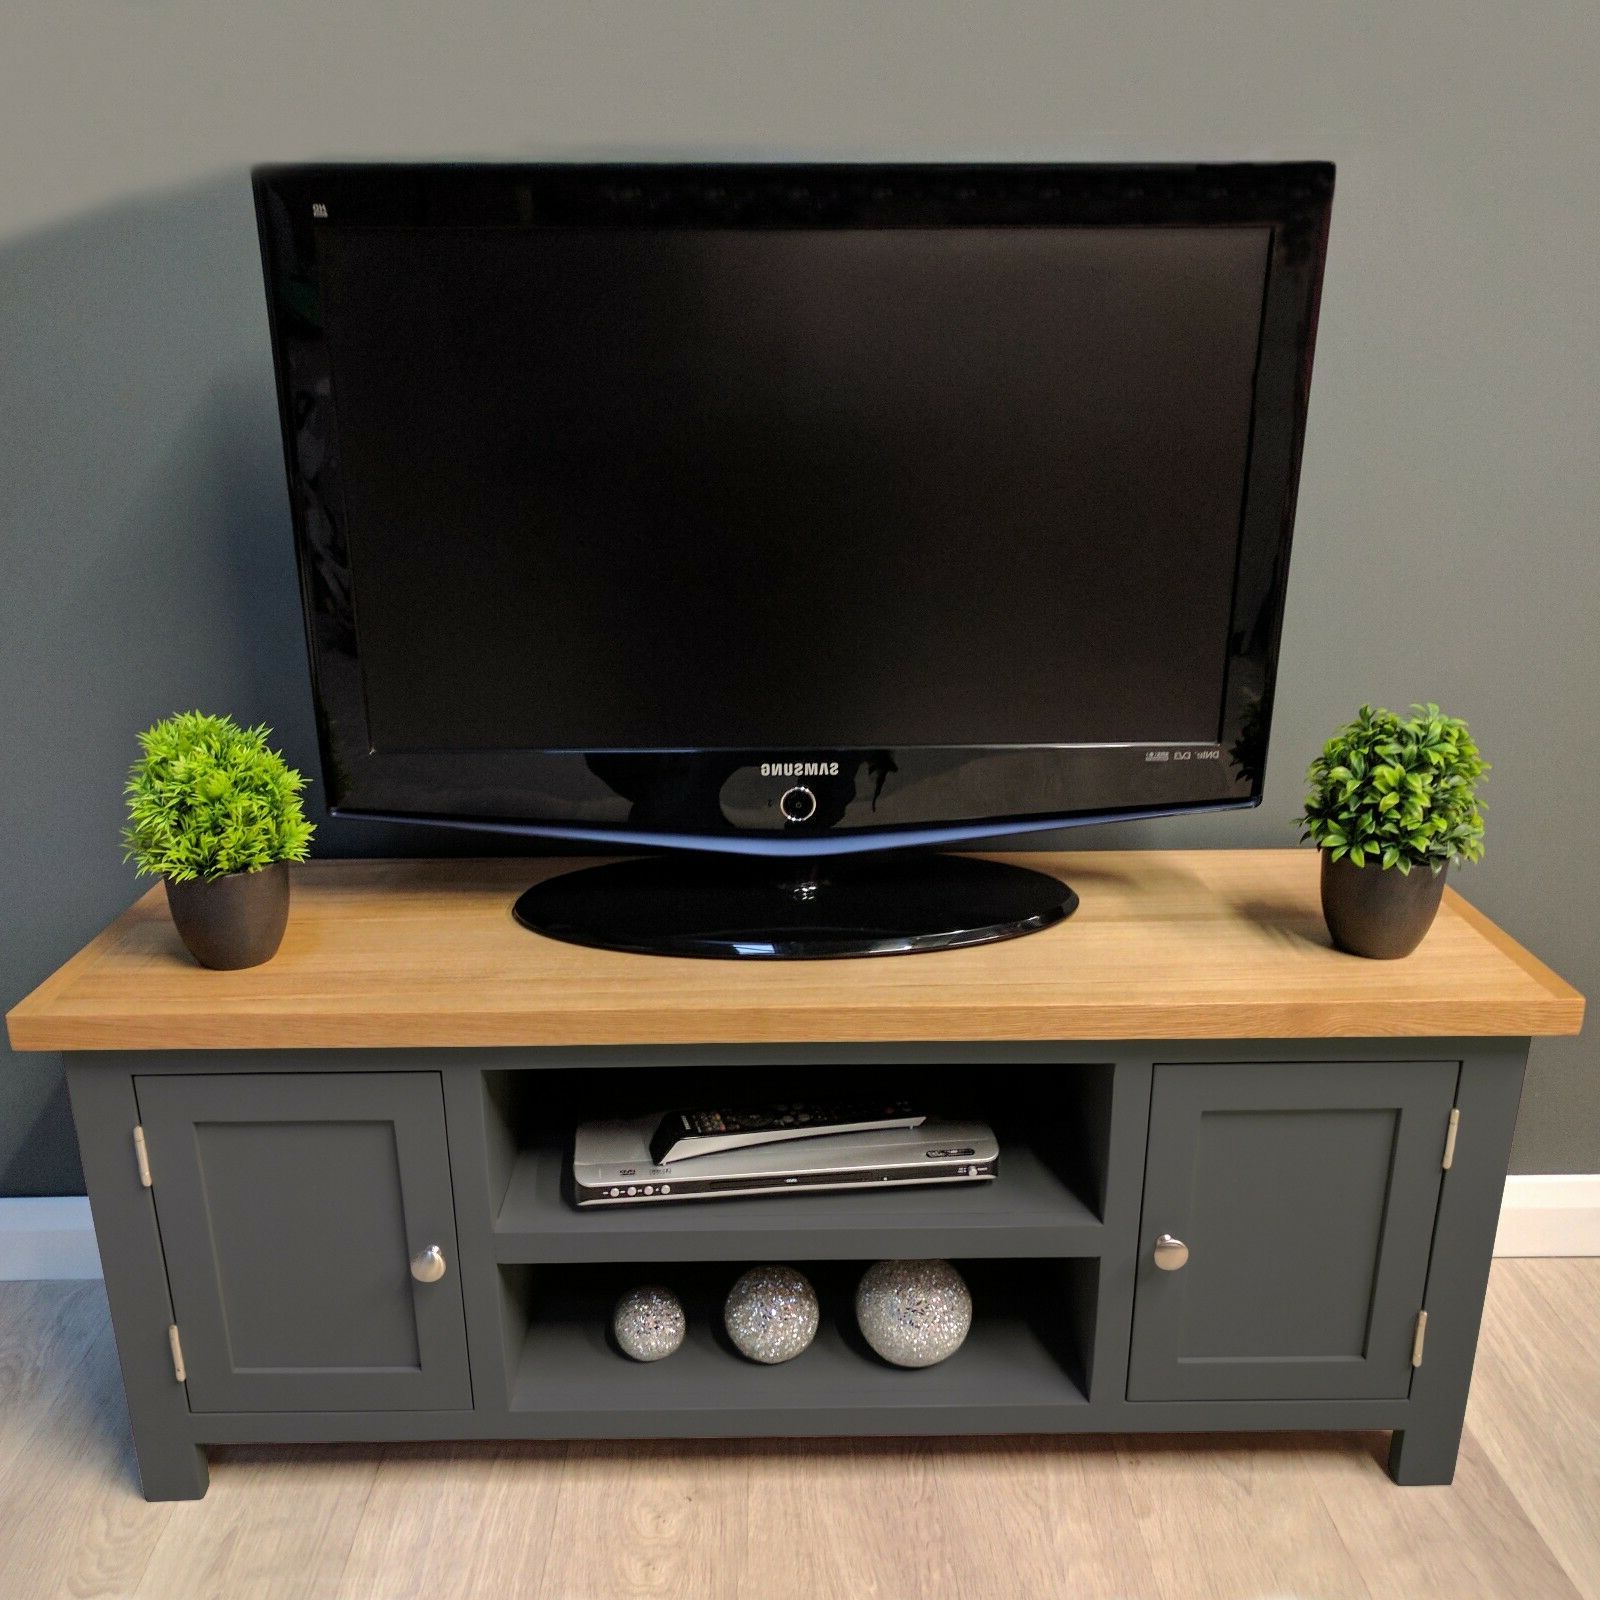 Painted Oak Tv Unit Large / Solid Wood / Dark Grey / Tv Throughout Richmond Tv Unit Stands (Gallery 3 of 20)